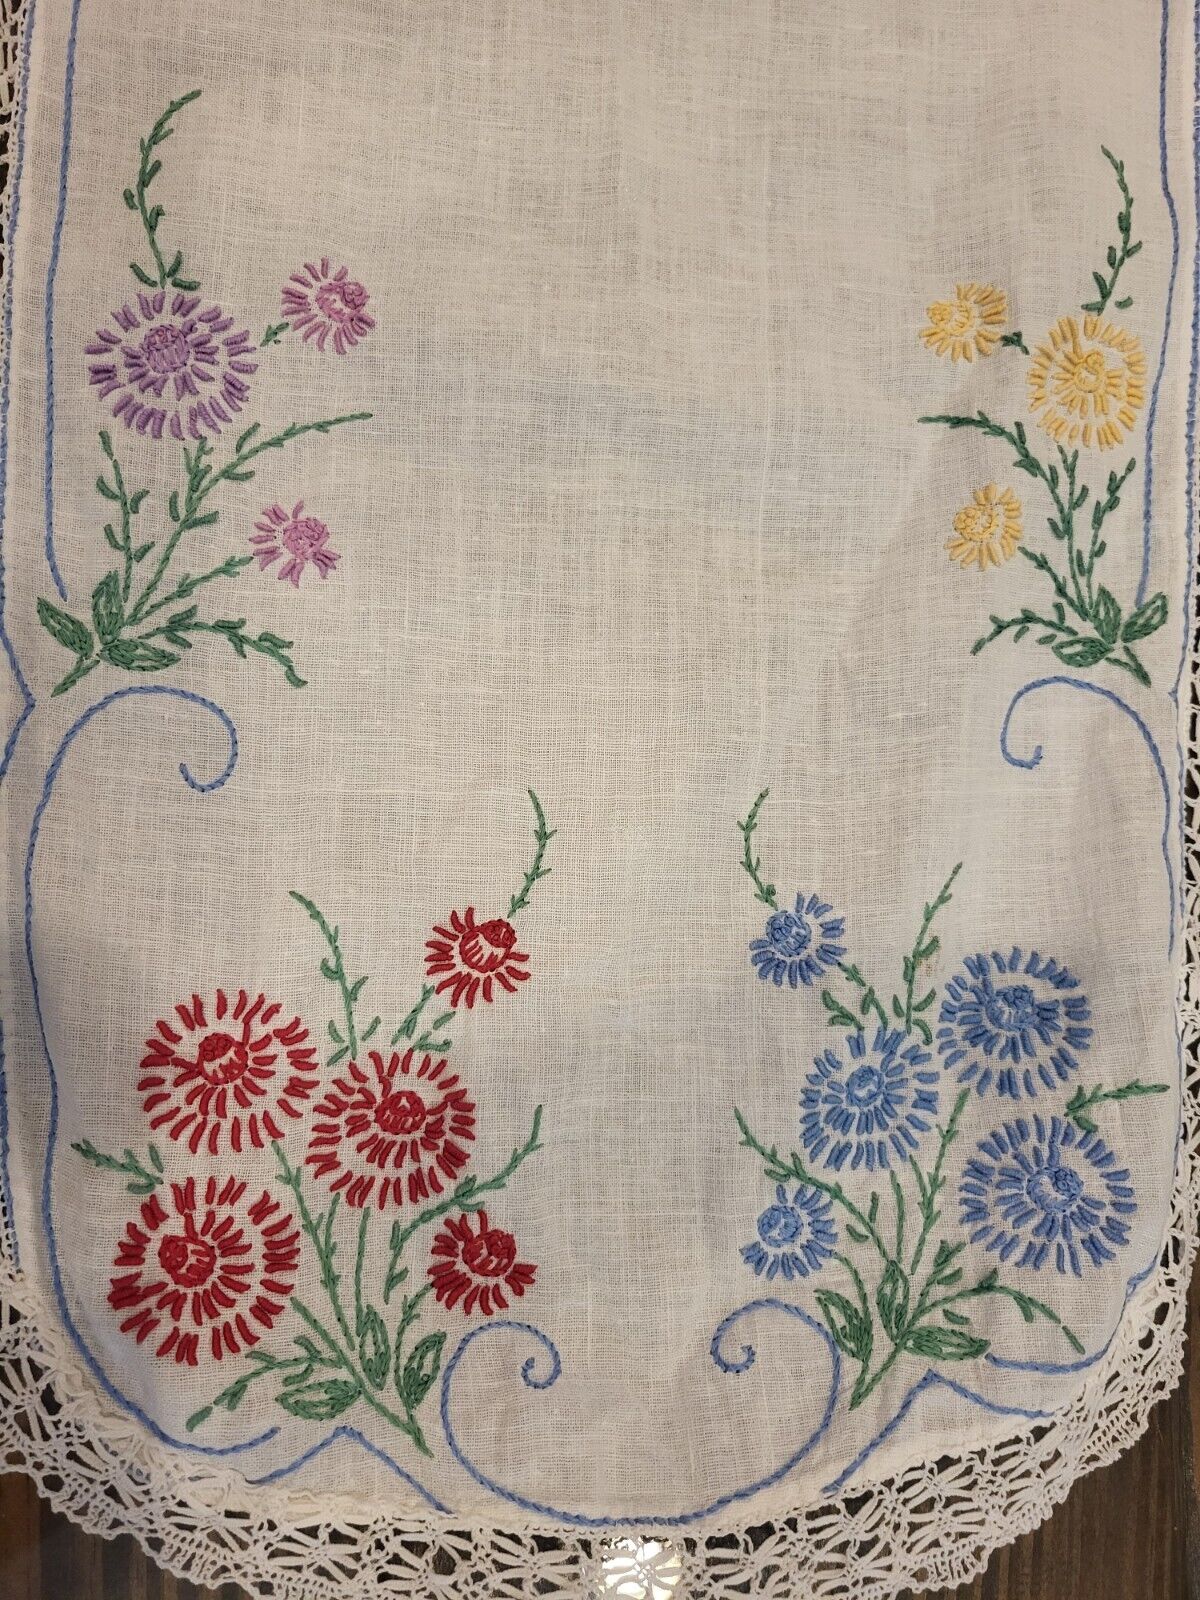 Vtge Handmade Embroidered Red Blue Green Purple Floral Table Runner Scarf